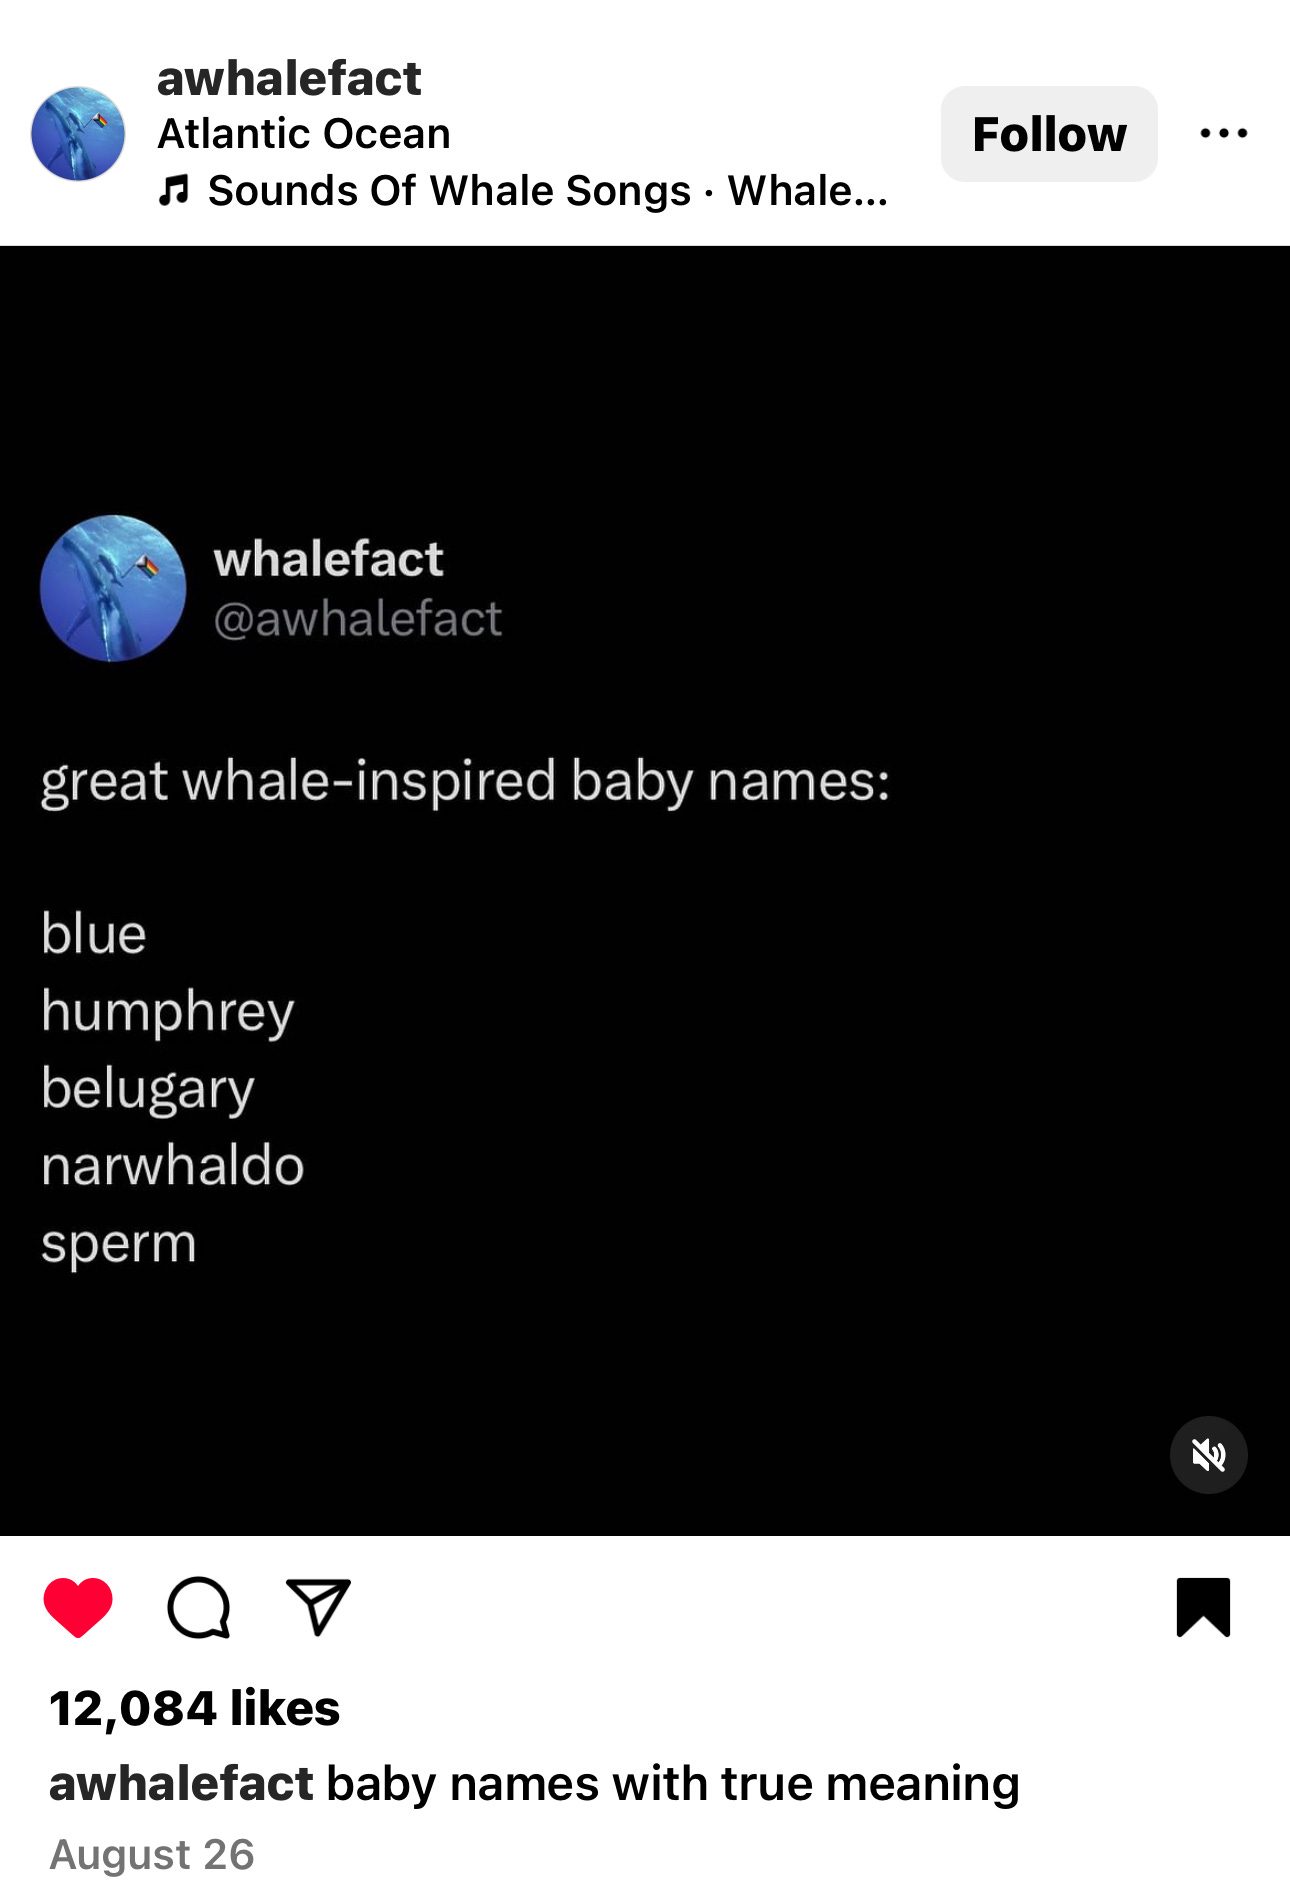 awhalefact on Instagram: great whale-inspired baby names: blue, humphrey, belugary, narwhaldo, sperm